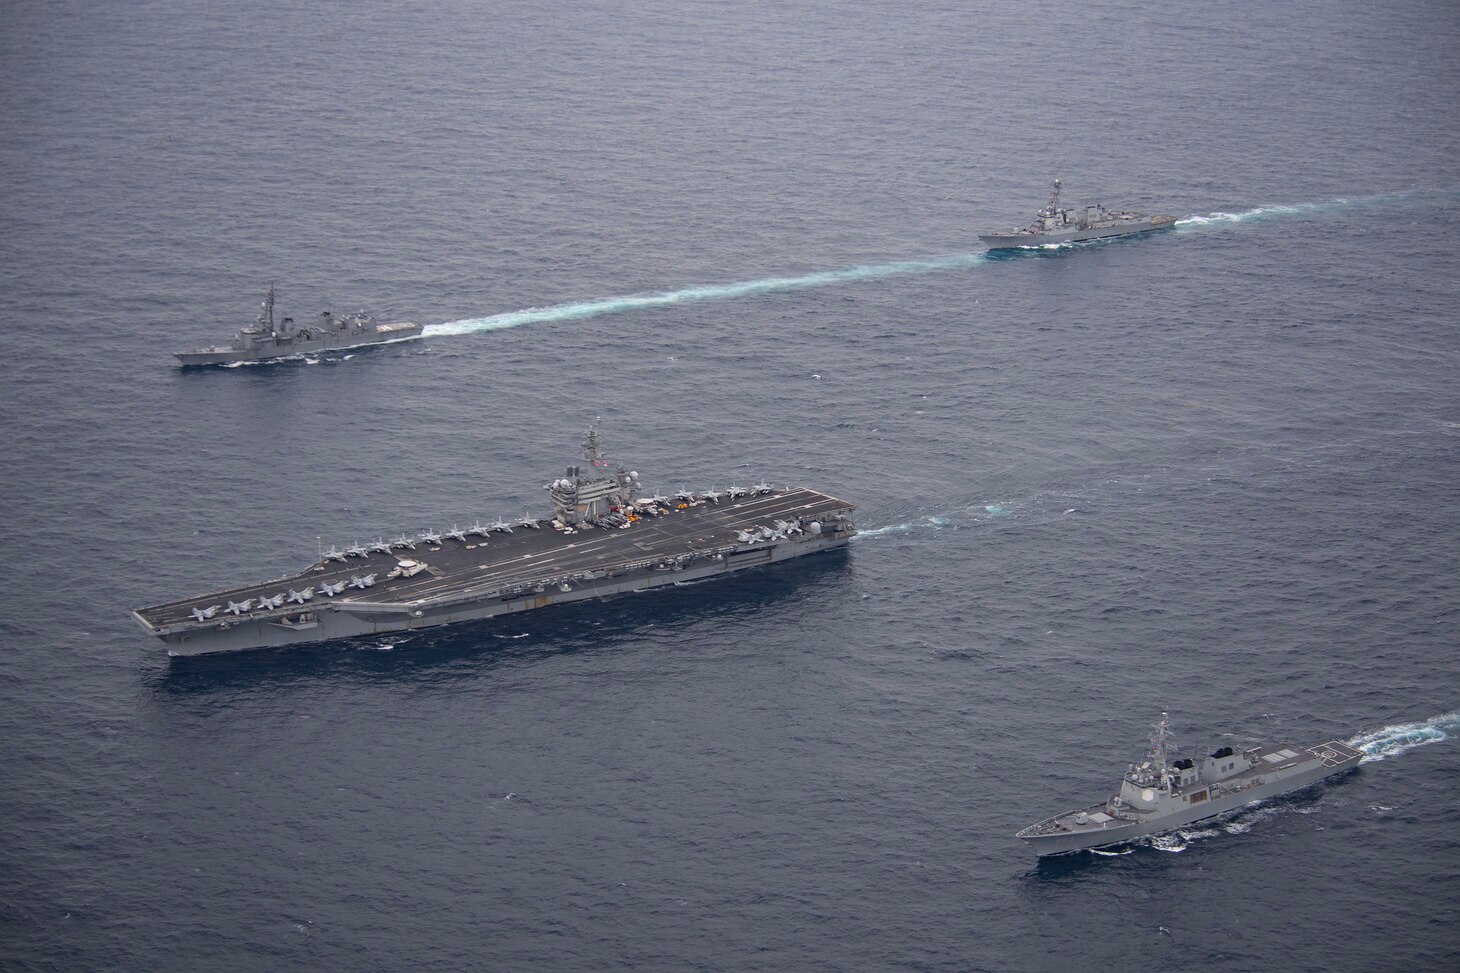 Japan, Republic of Korea, US Navy partner in trilateral naval exercise > United States Navy > News